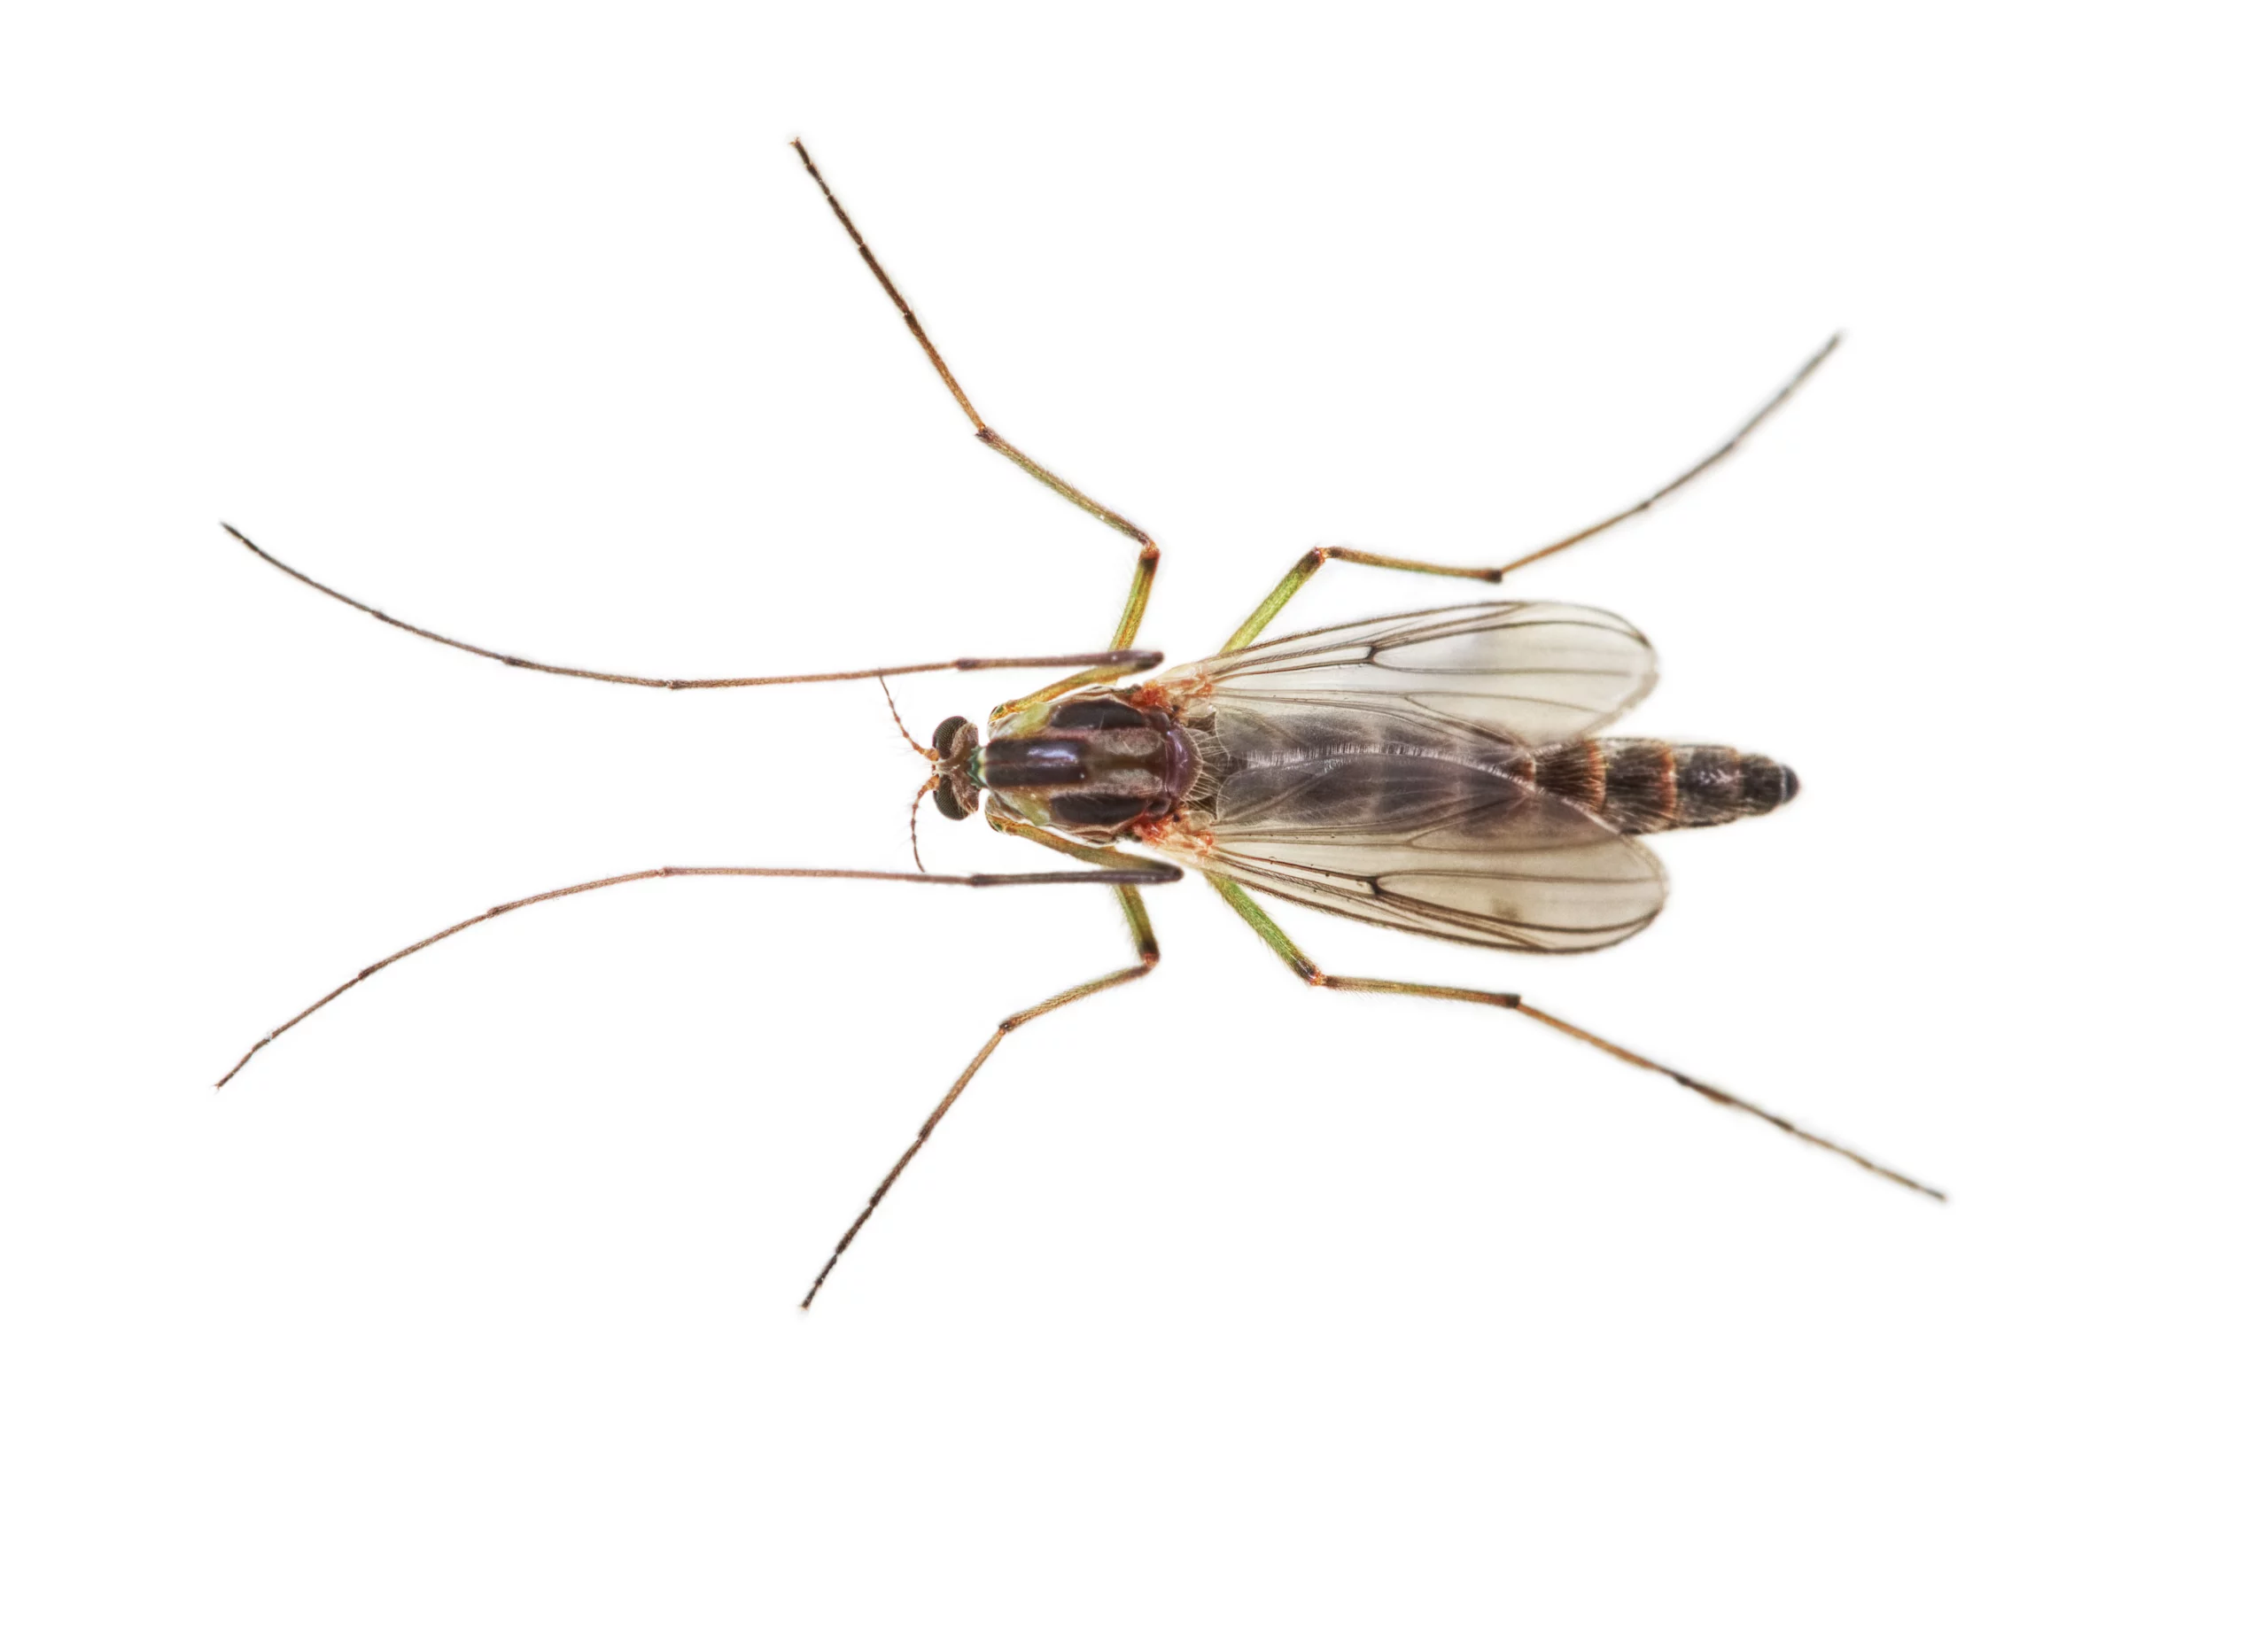 A buzzer midge against a white background - Keep pantry pests out of your home with Kona Coast Pest Control in Kailua Kona